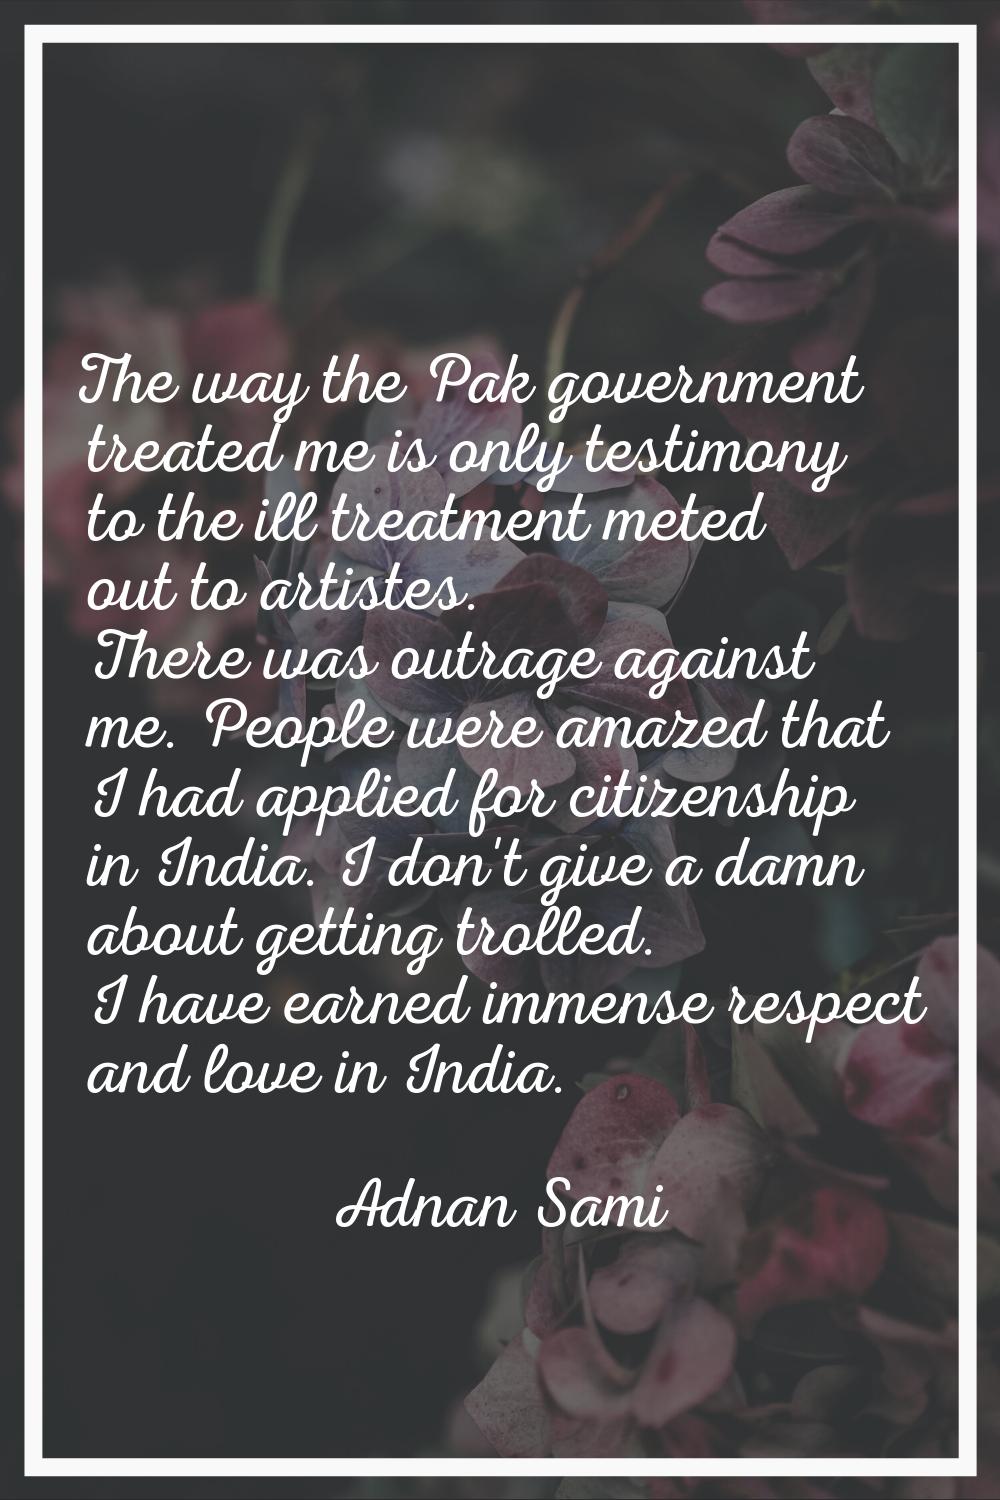 The way the Pak government treated me is only testimony to the ill treatment meted out to artistes.